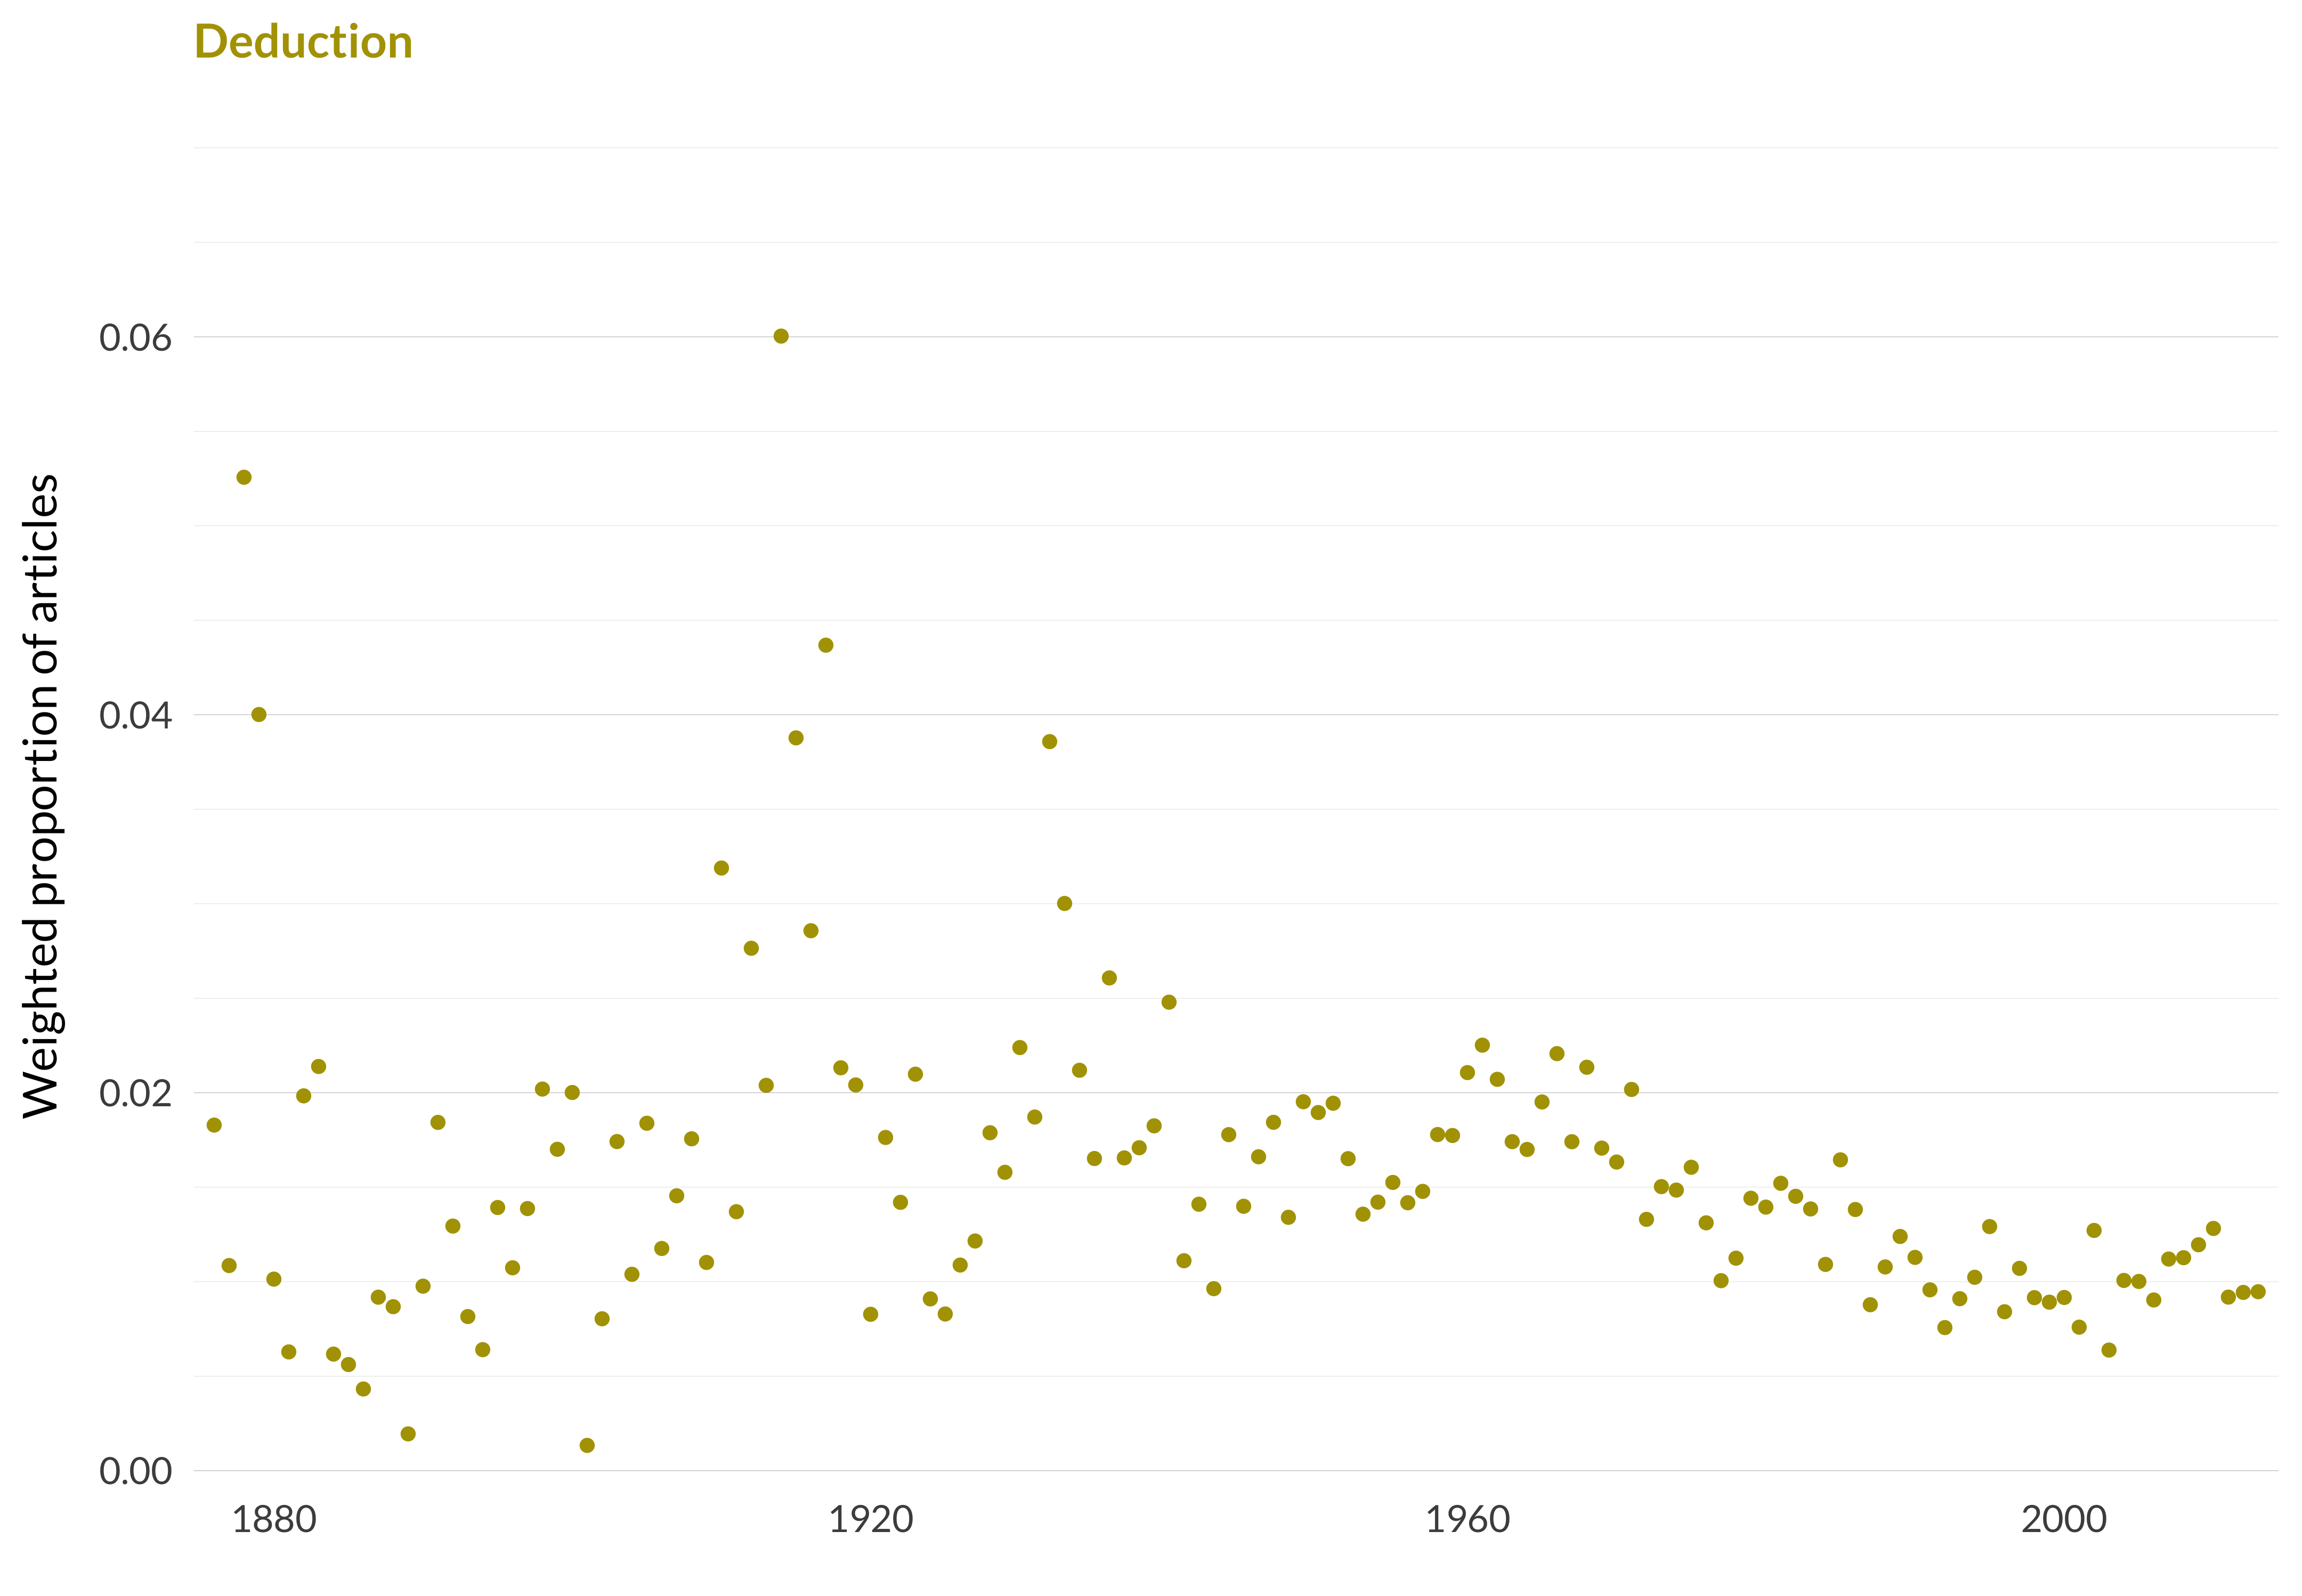 A scatterplot showing which proportion of articles each year are in the deductiontopic. The x-axis shows the year, the y-axis measures the proportion of articles each year in this topic. There is one dot per year. The highest value is in 1914 when 6.0% of articles were in this topic. The lowest value is in 1901 when 0.1% of articles were in this topic. The full table that provides the data for this graph is available in Table A.17 in Appendix A.